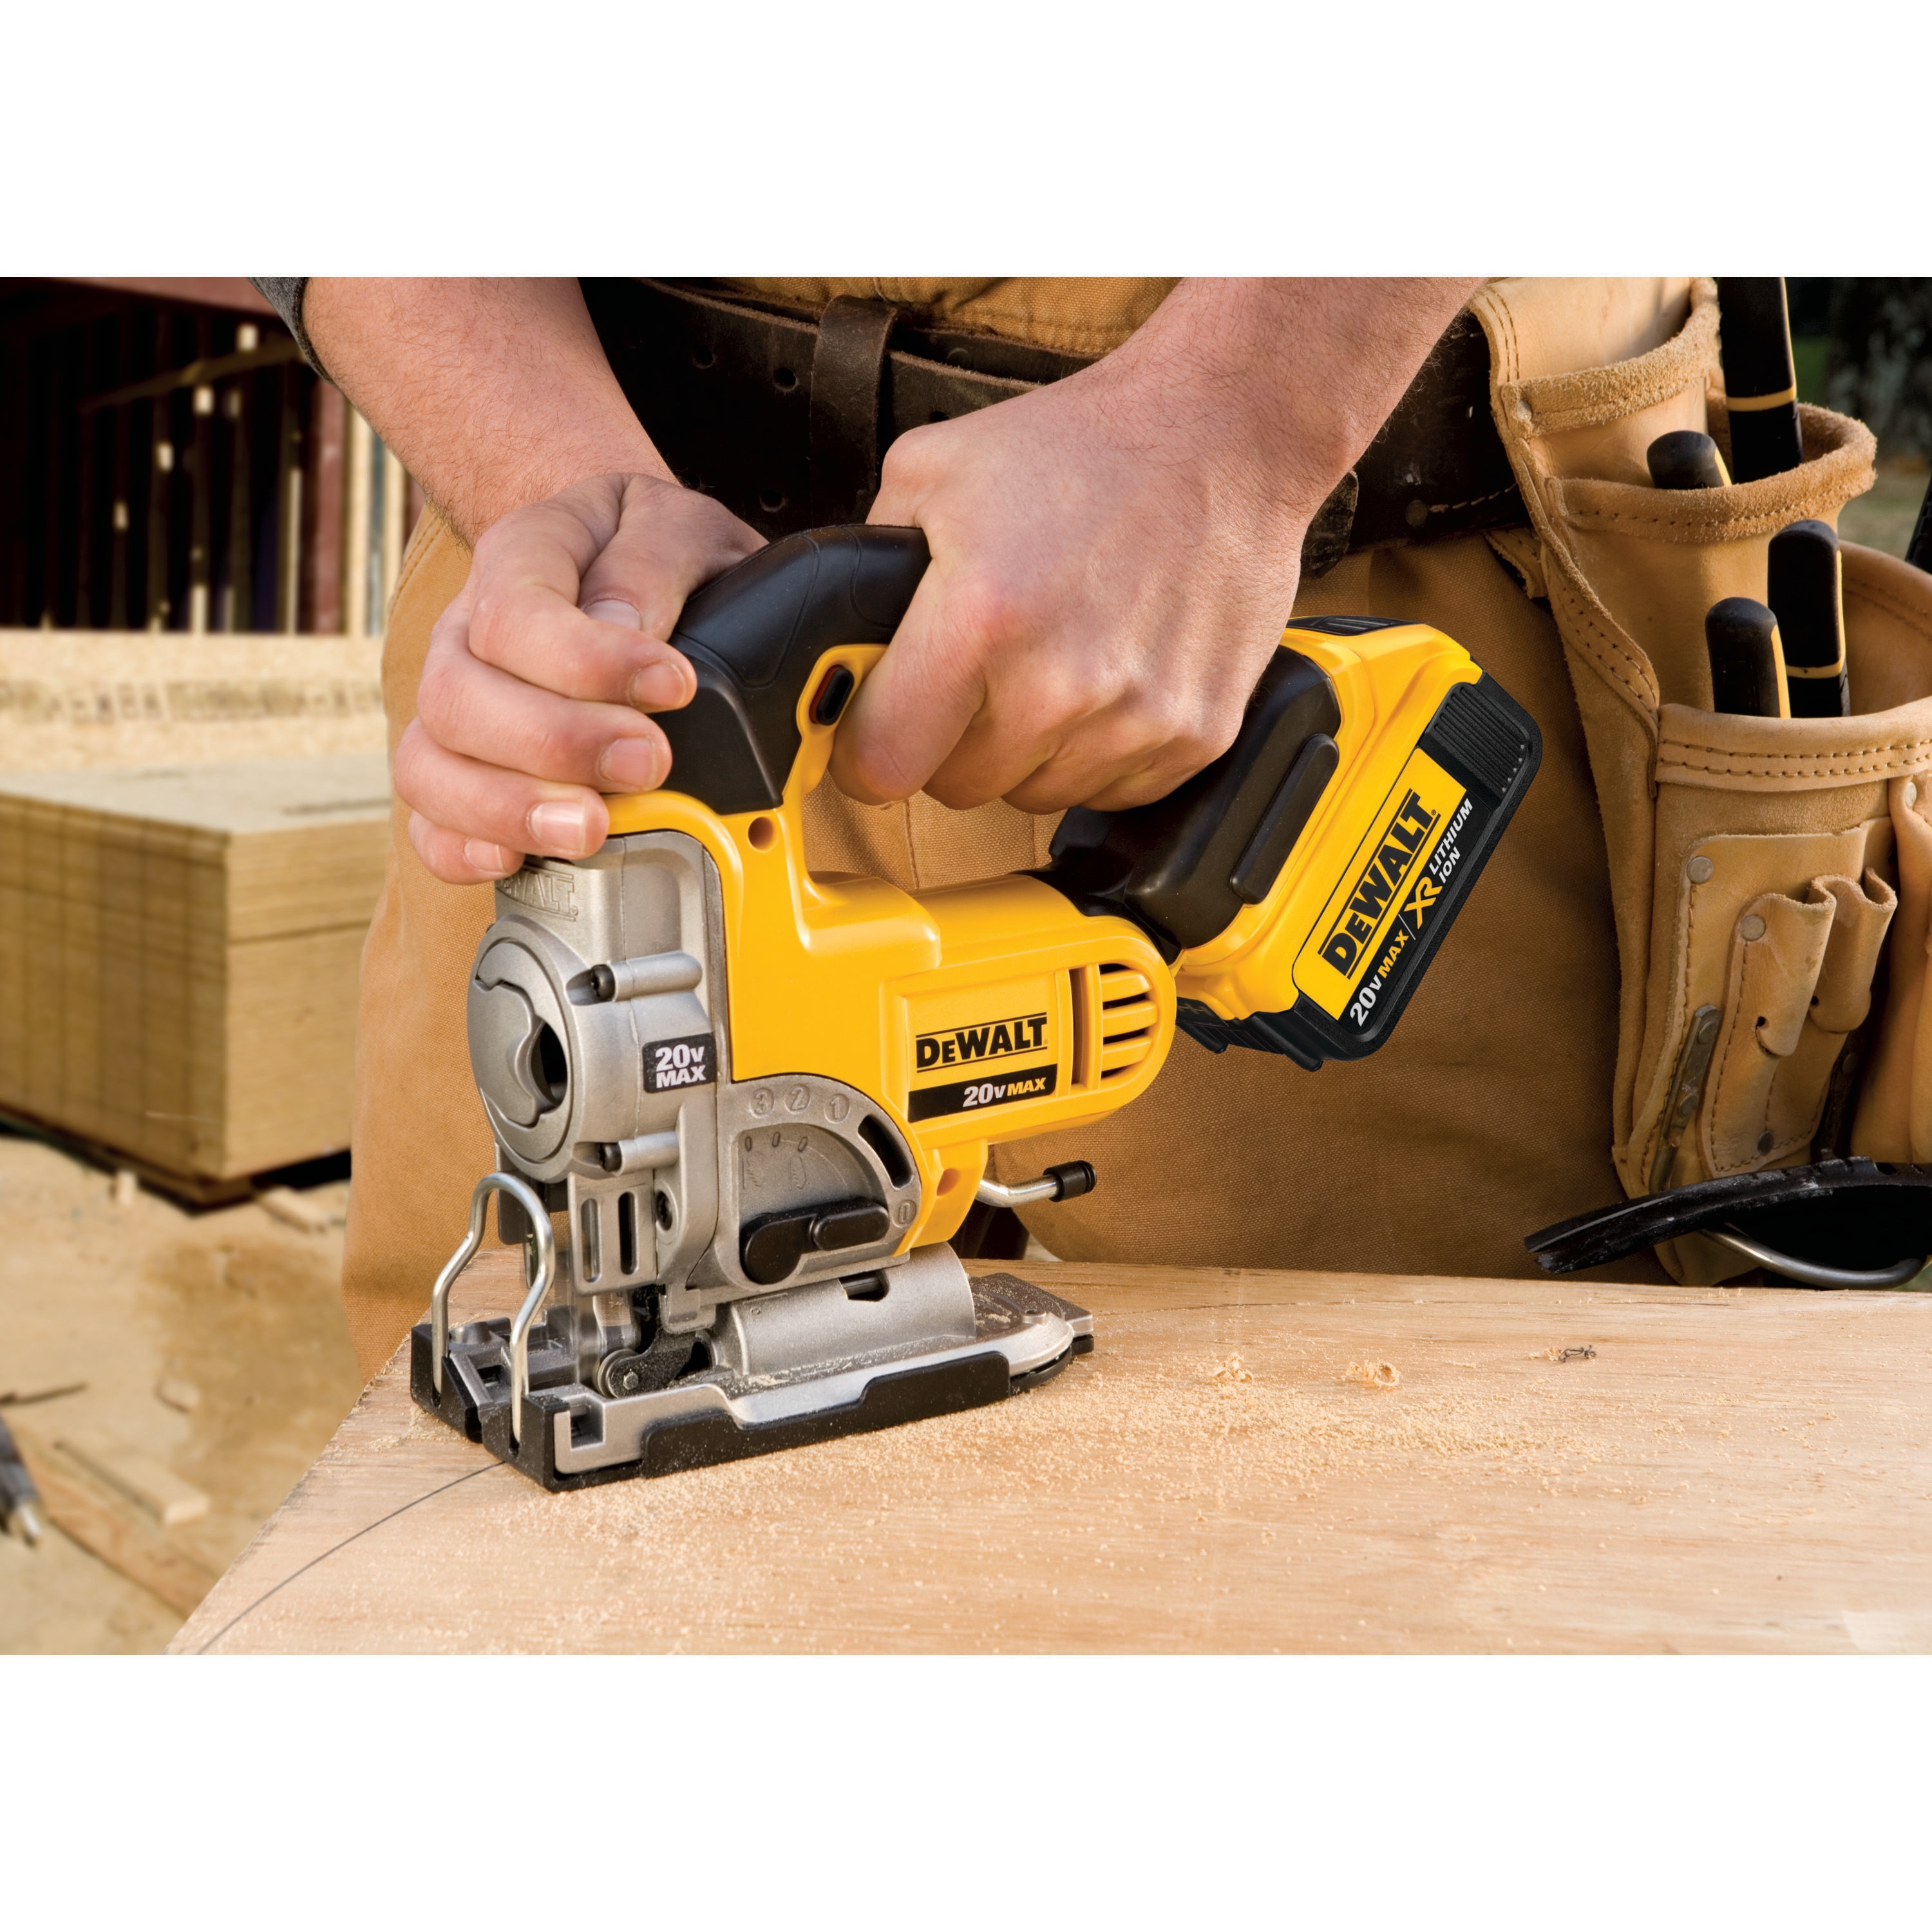 vlinder Tijdens ~ component DEWALT 20-Volt Max Variable Speed Keyless Cordless Jigsaw (Tool Only) in  the Jigsaws department at Lowes.com